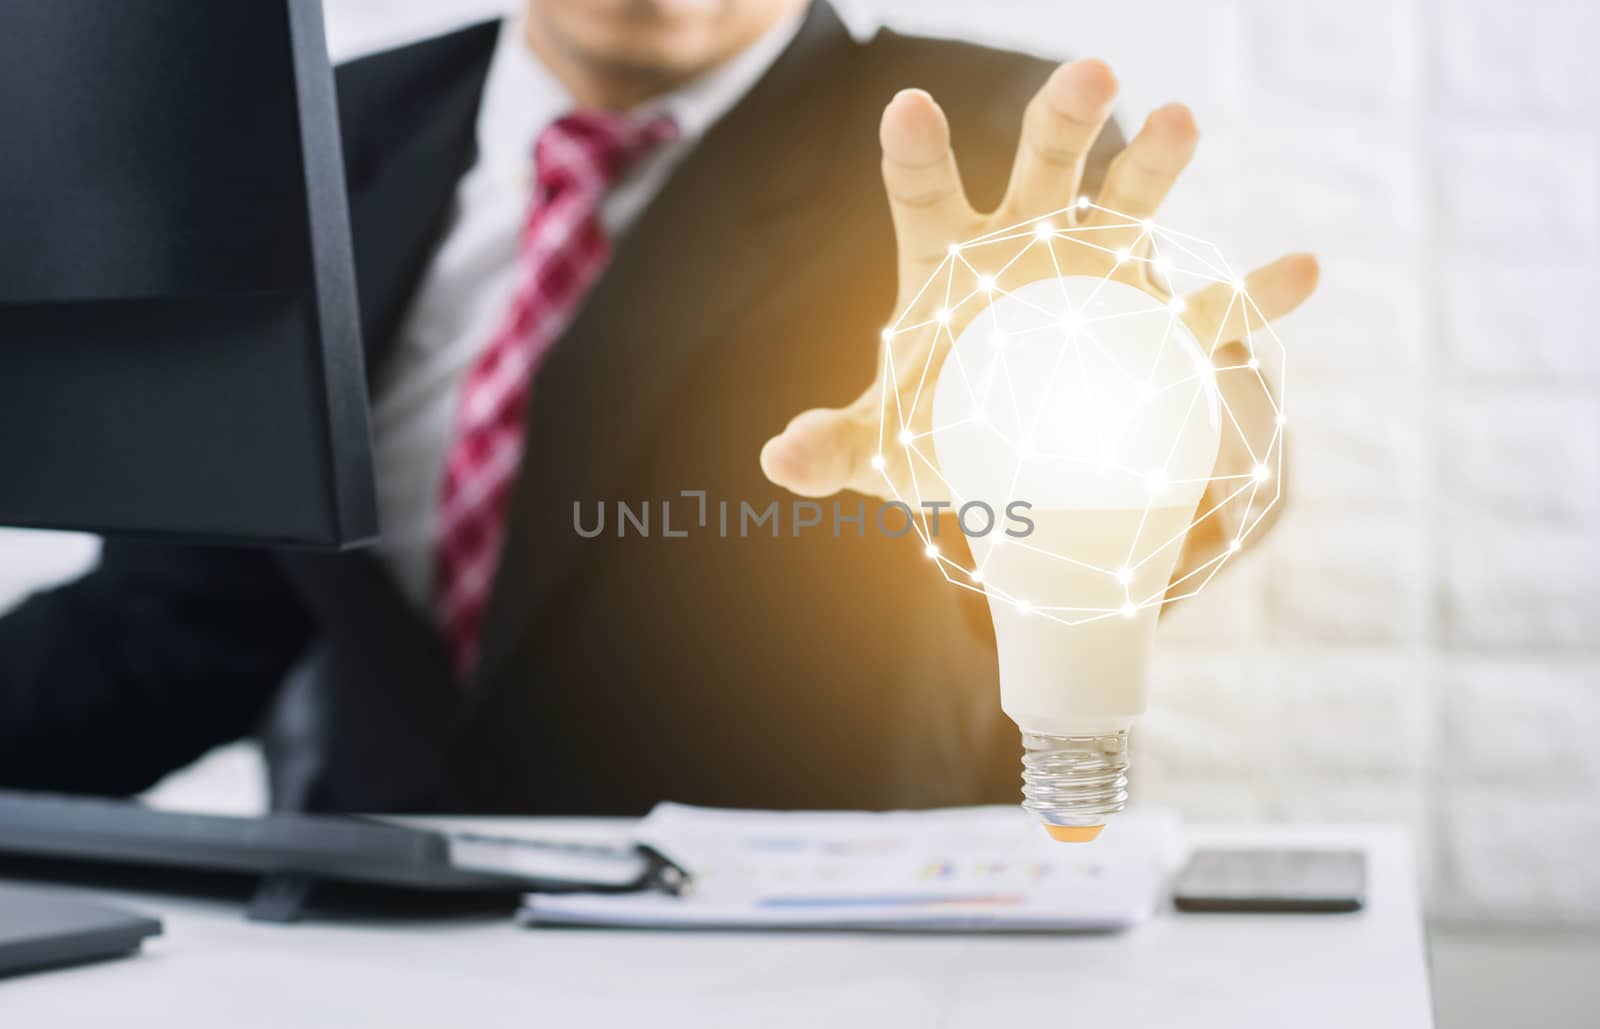 Businessman concepts hands of the light bulb new ideas with innovative technology solution 